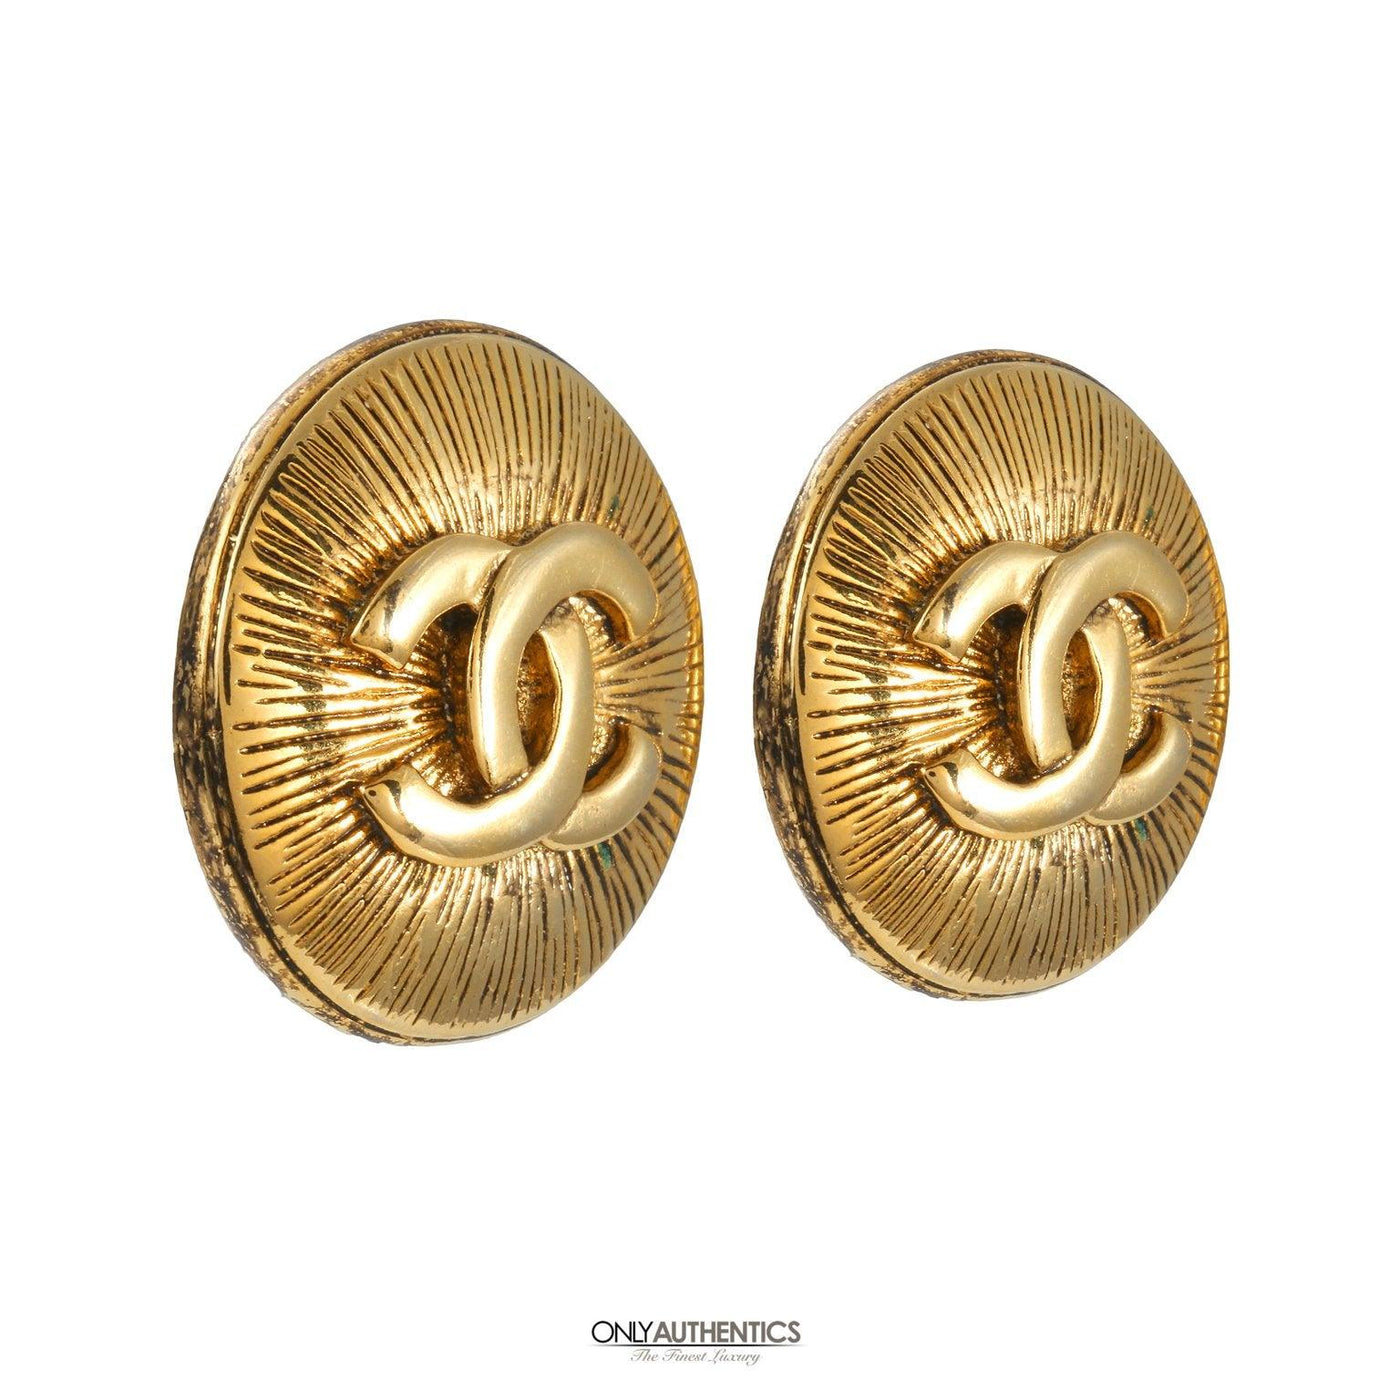 Chanel Gold CC Starburst Earrings - Only Authentics